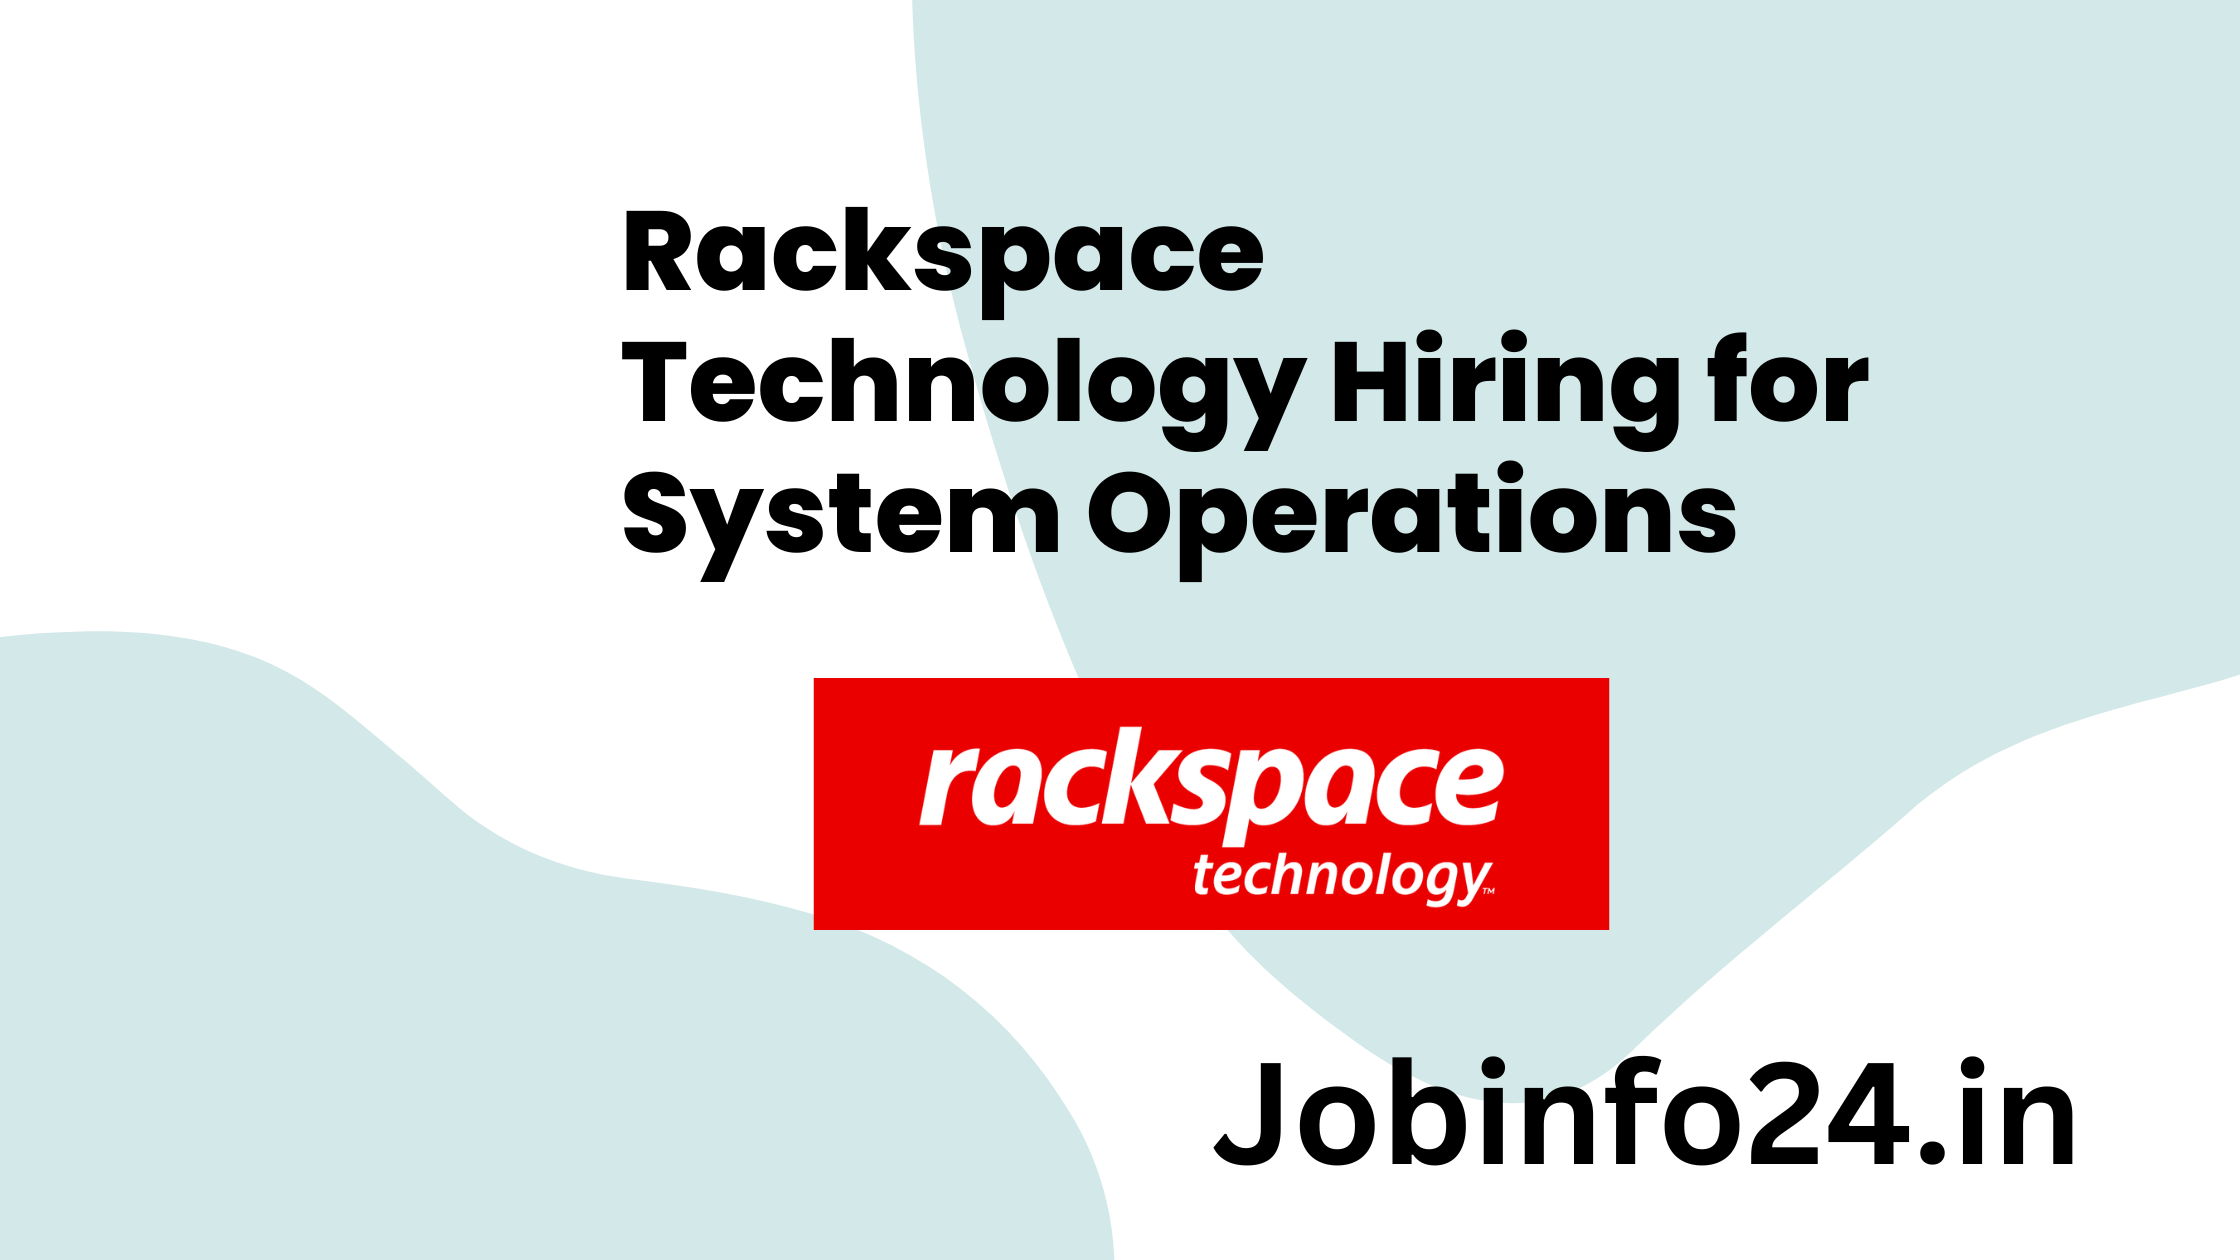 Rackspace Technology Hiring for System Operations